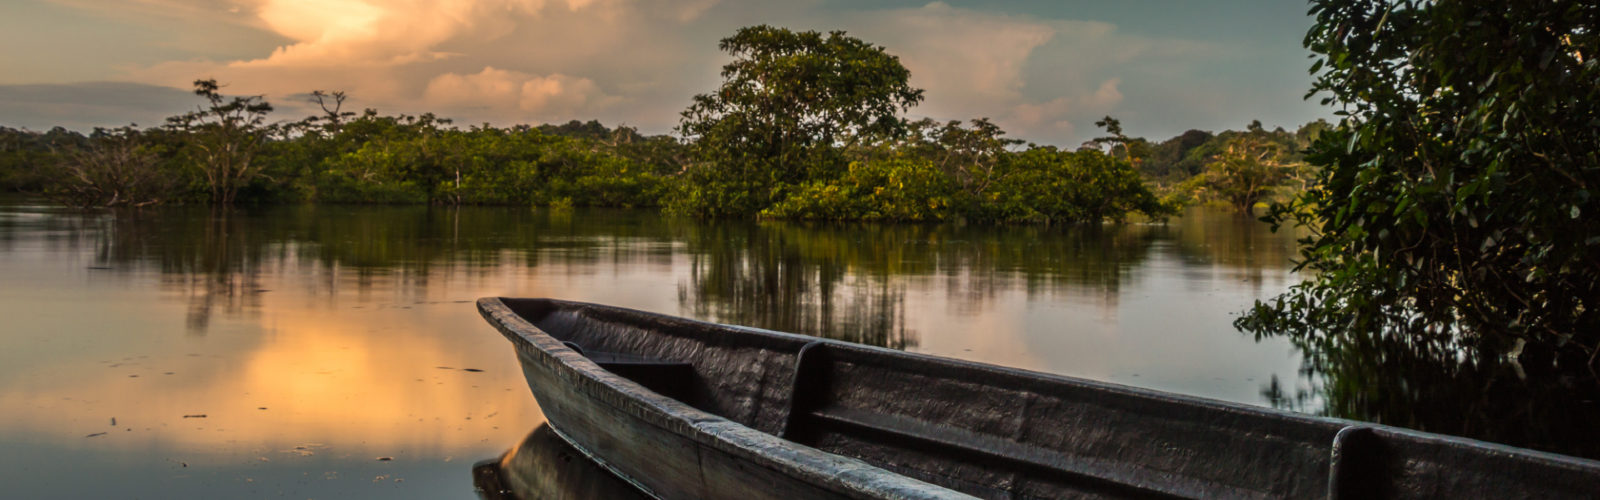 A boat sits on the water amid Ecuador's Amazon